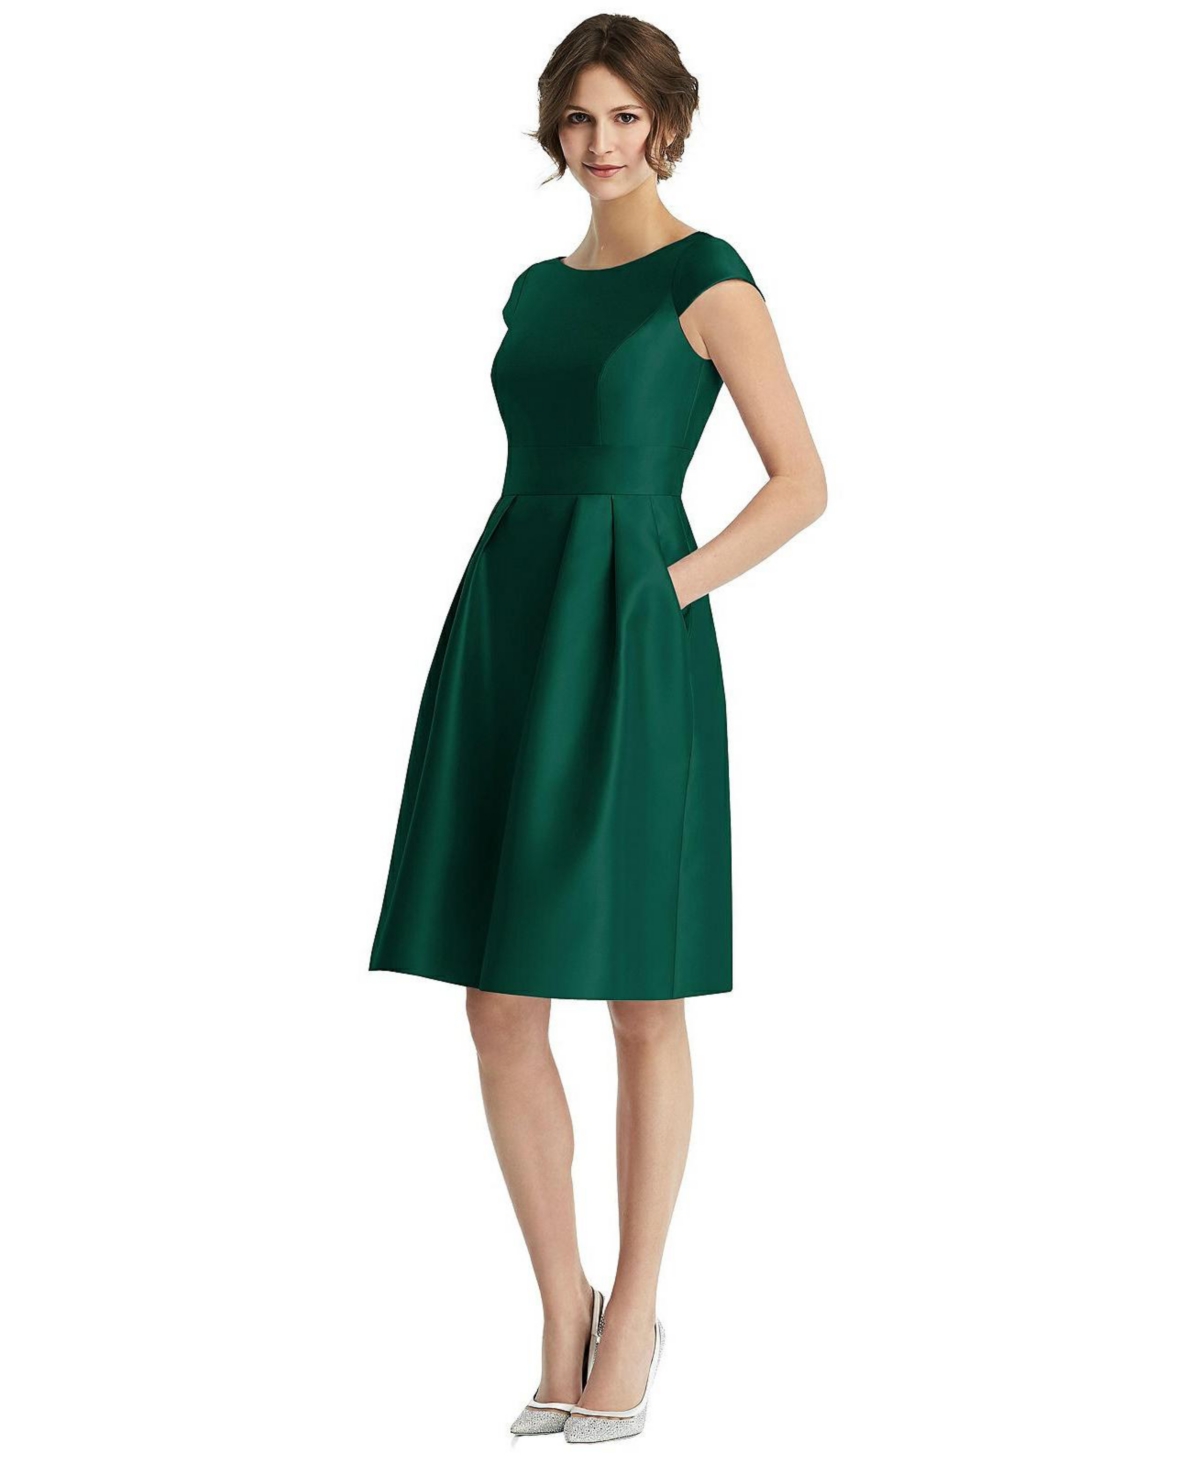 Womens Cap Sleeve Pleated Cocktail Dress with Pockets - Mist